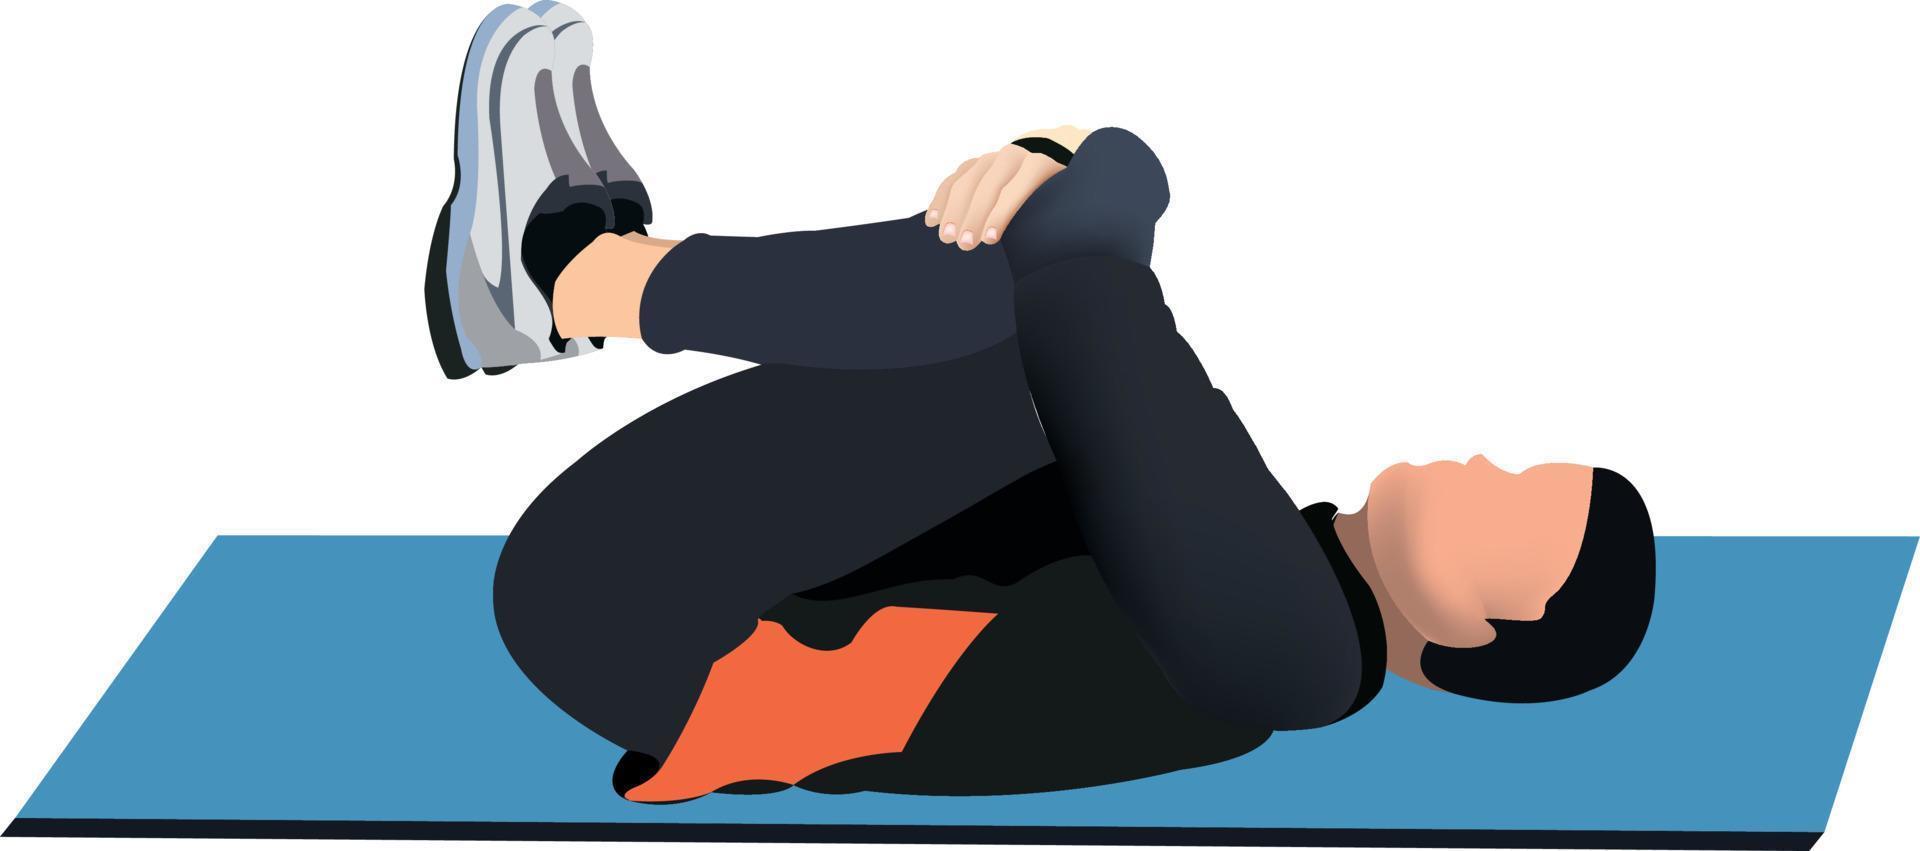 Postural gymnastics exercise. The illustration shows a man on a mat performing a stretching exercise. vector